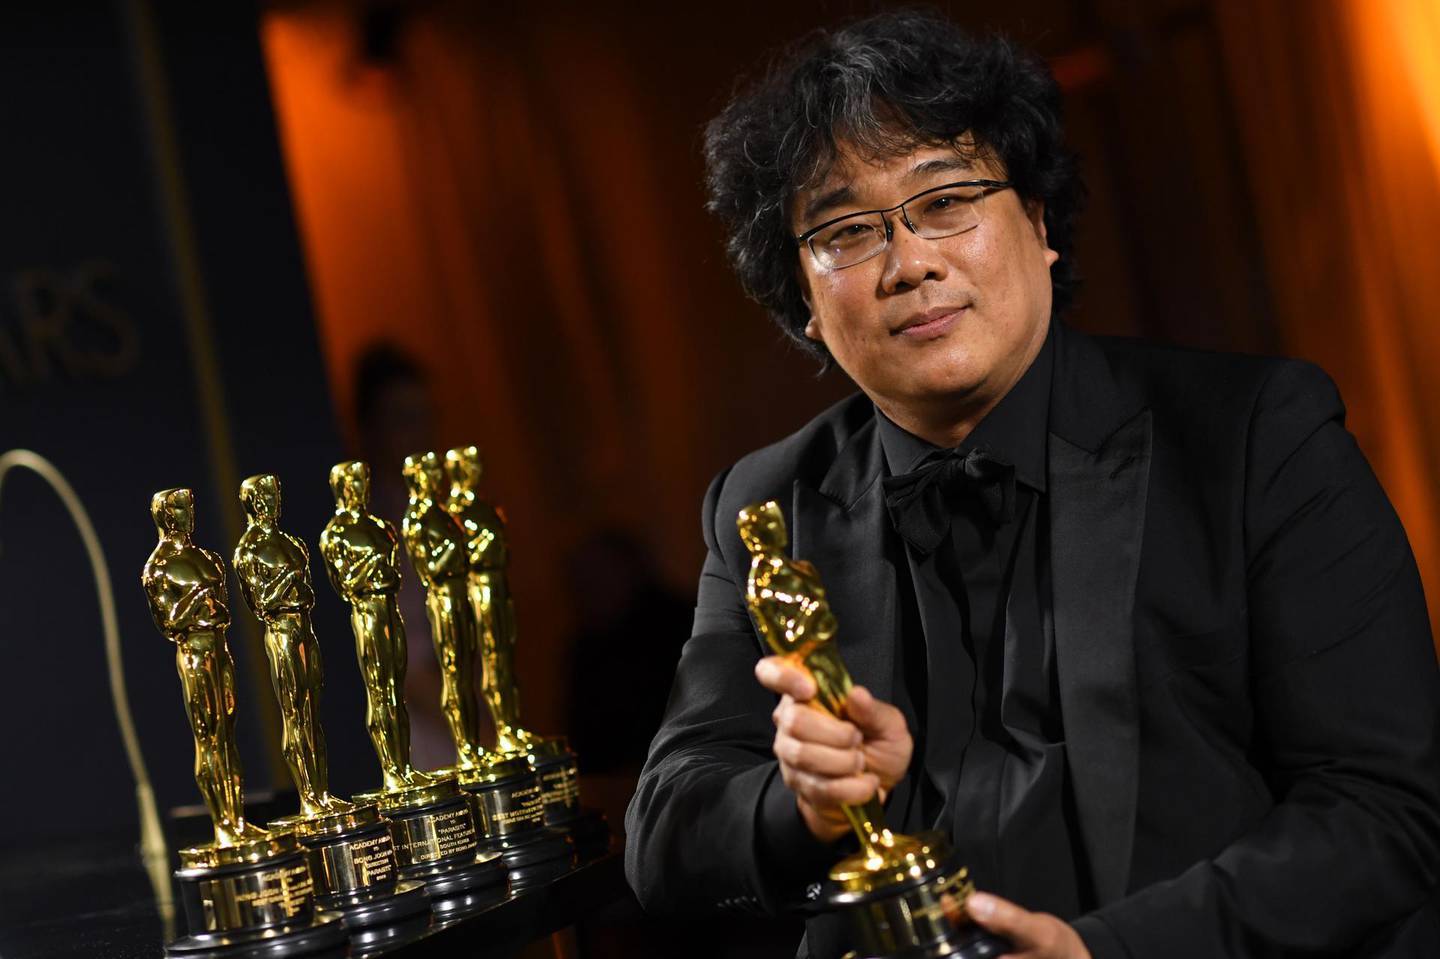 (FILES) In this file photo taken on February 10, 2020 South Korean film director Bong Joon Ho poses with his engraved awards as he attends the 92nd Oscars Governors Ball at the Hollywood & Highland Center in Hollywood, California. Palme d'Or and Oscar academy awards winner, South Korean director Bong Joon-ho will preside over the jury of the 78th edition of the Venice Film Festival, which will take place from through September 1-11, 2021 organisers announced on January 15, 2021. / AFP / VALERIE MACON
